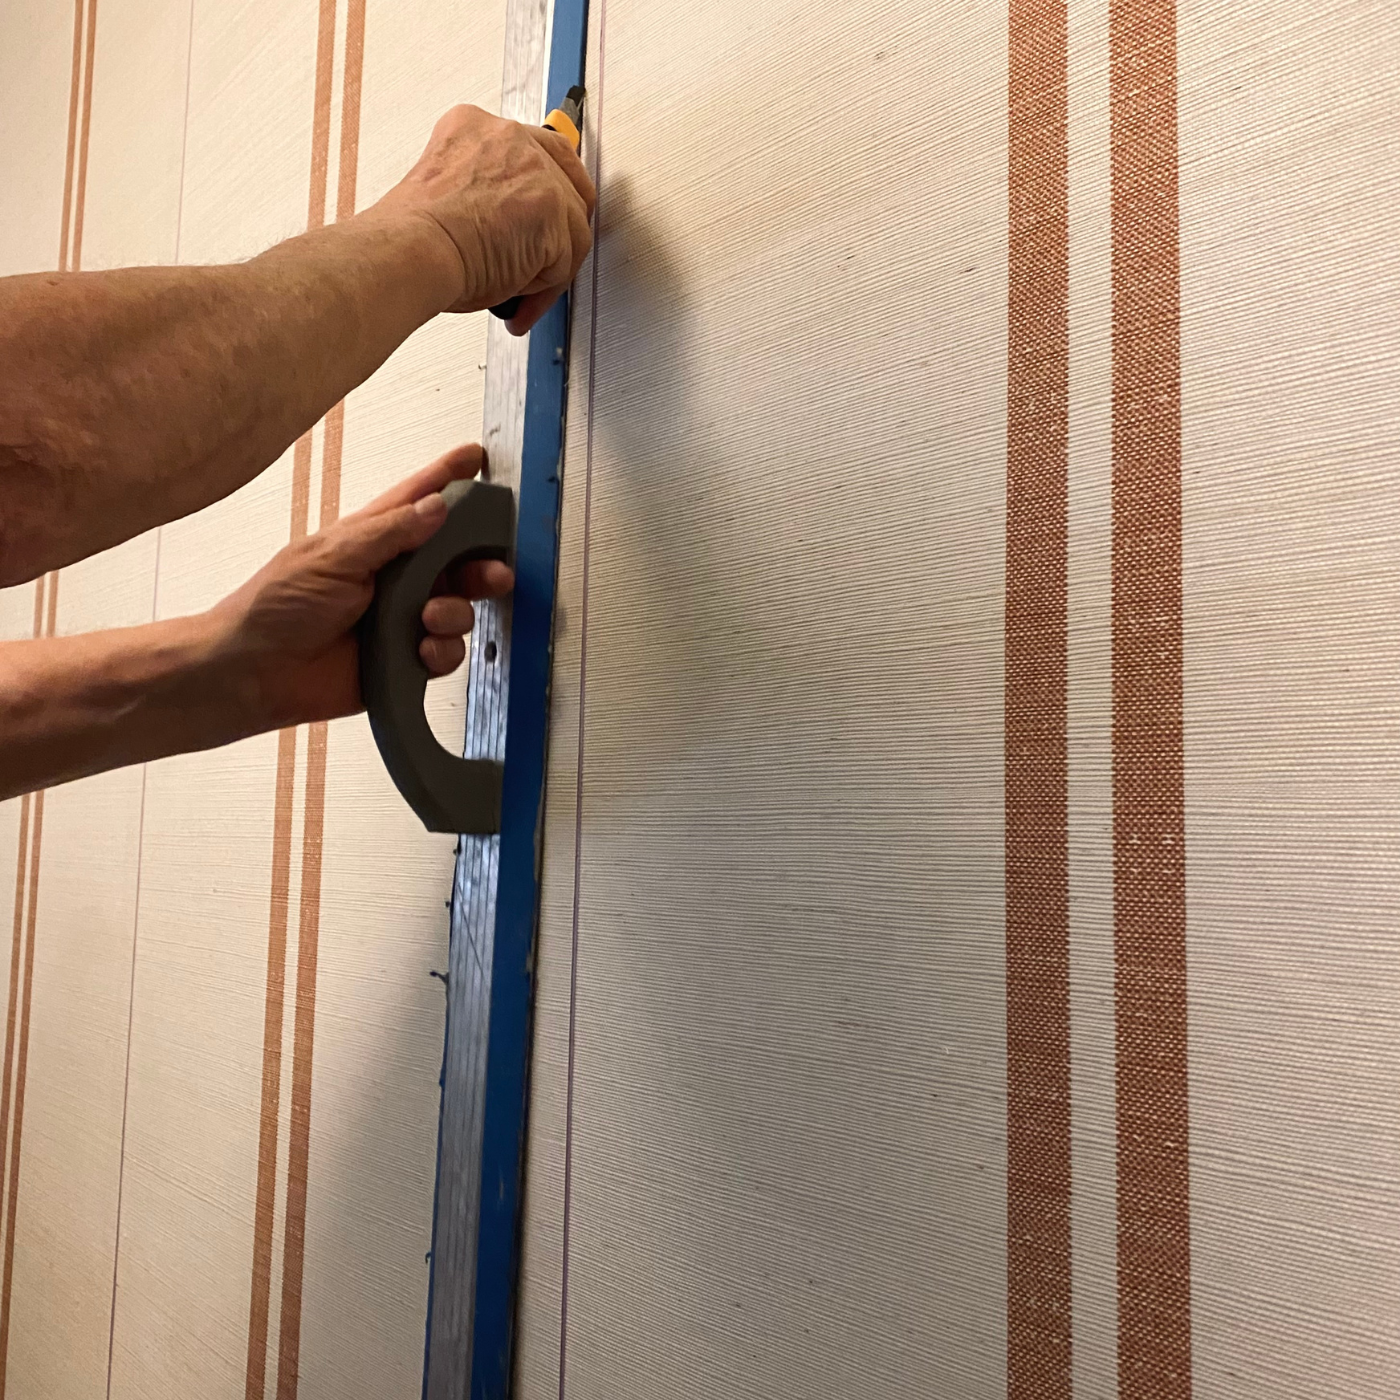 A photo of a wallpaper installation. A left hand holds a blue level while a right hand holds a small tool while installing wallpaper with a cream background and two repeating dark tan lines.